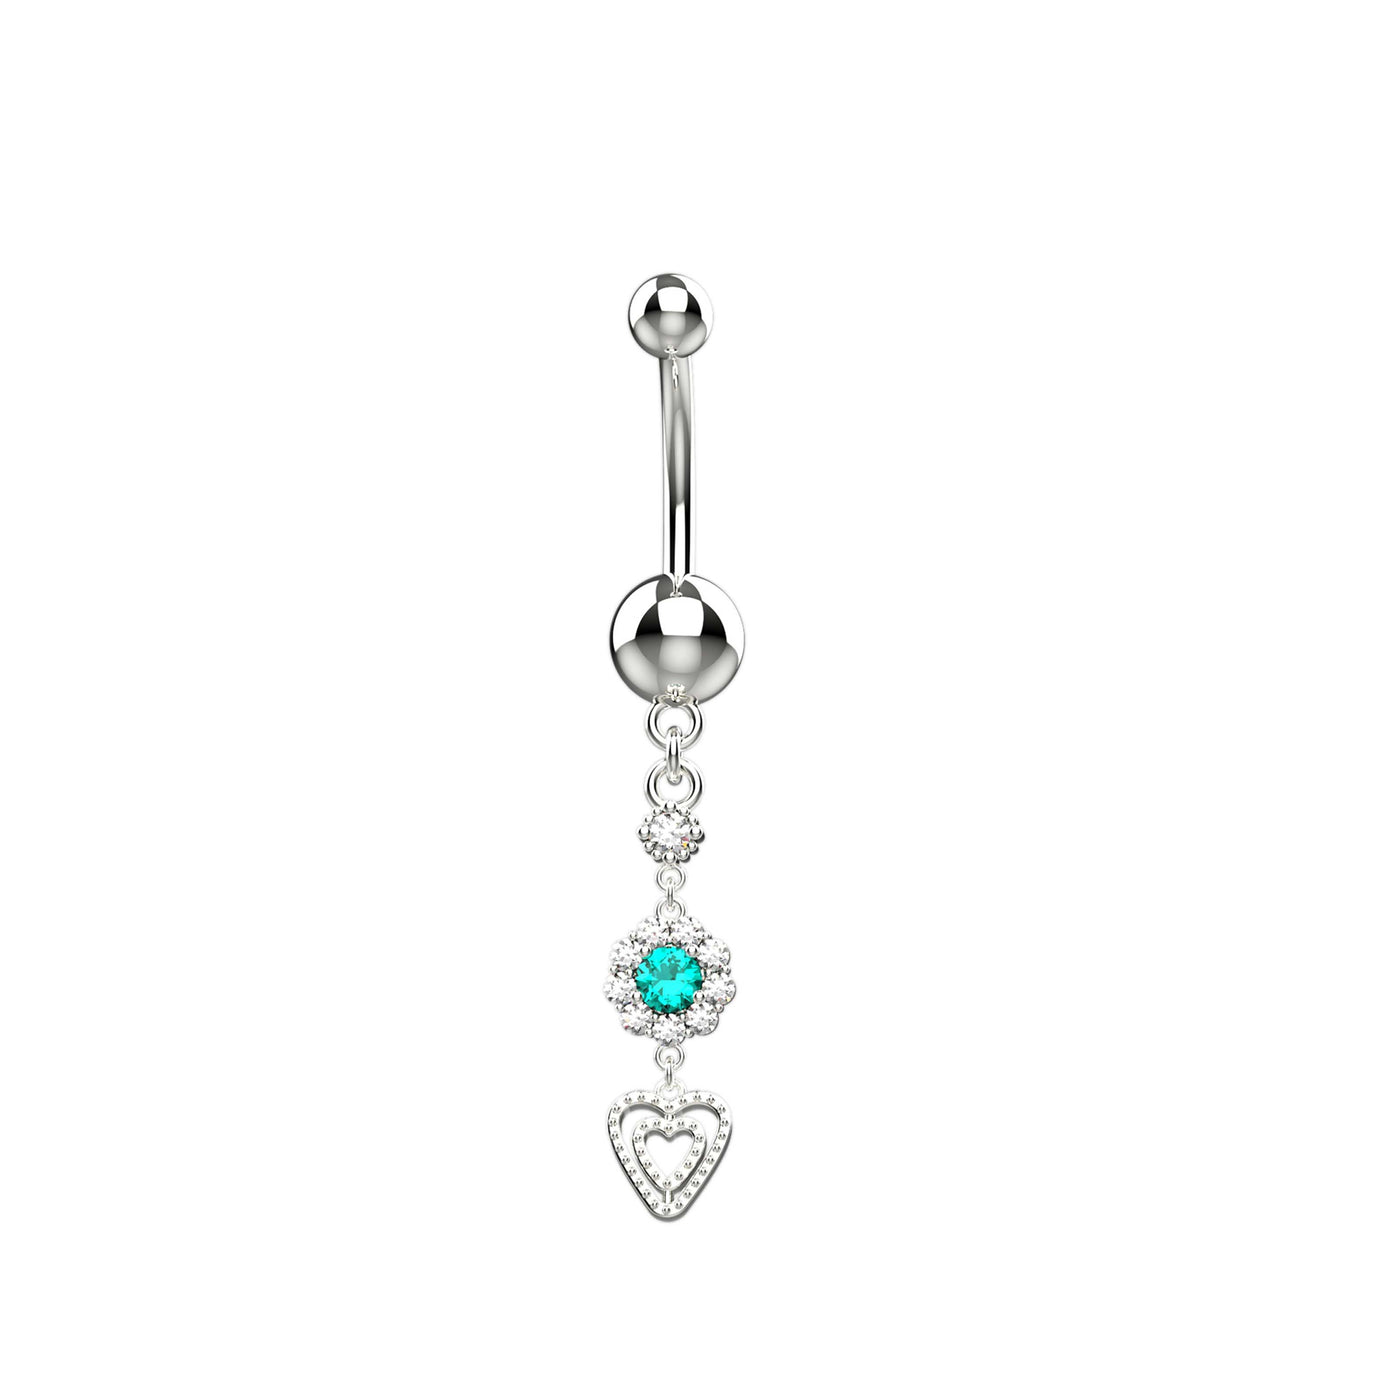 Heart Dangling End Belly Ring